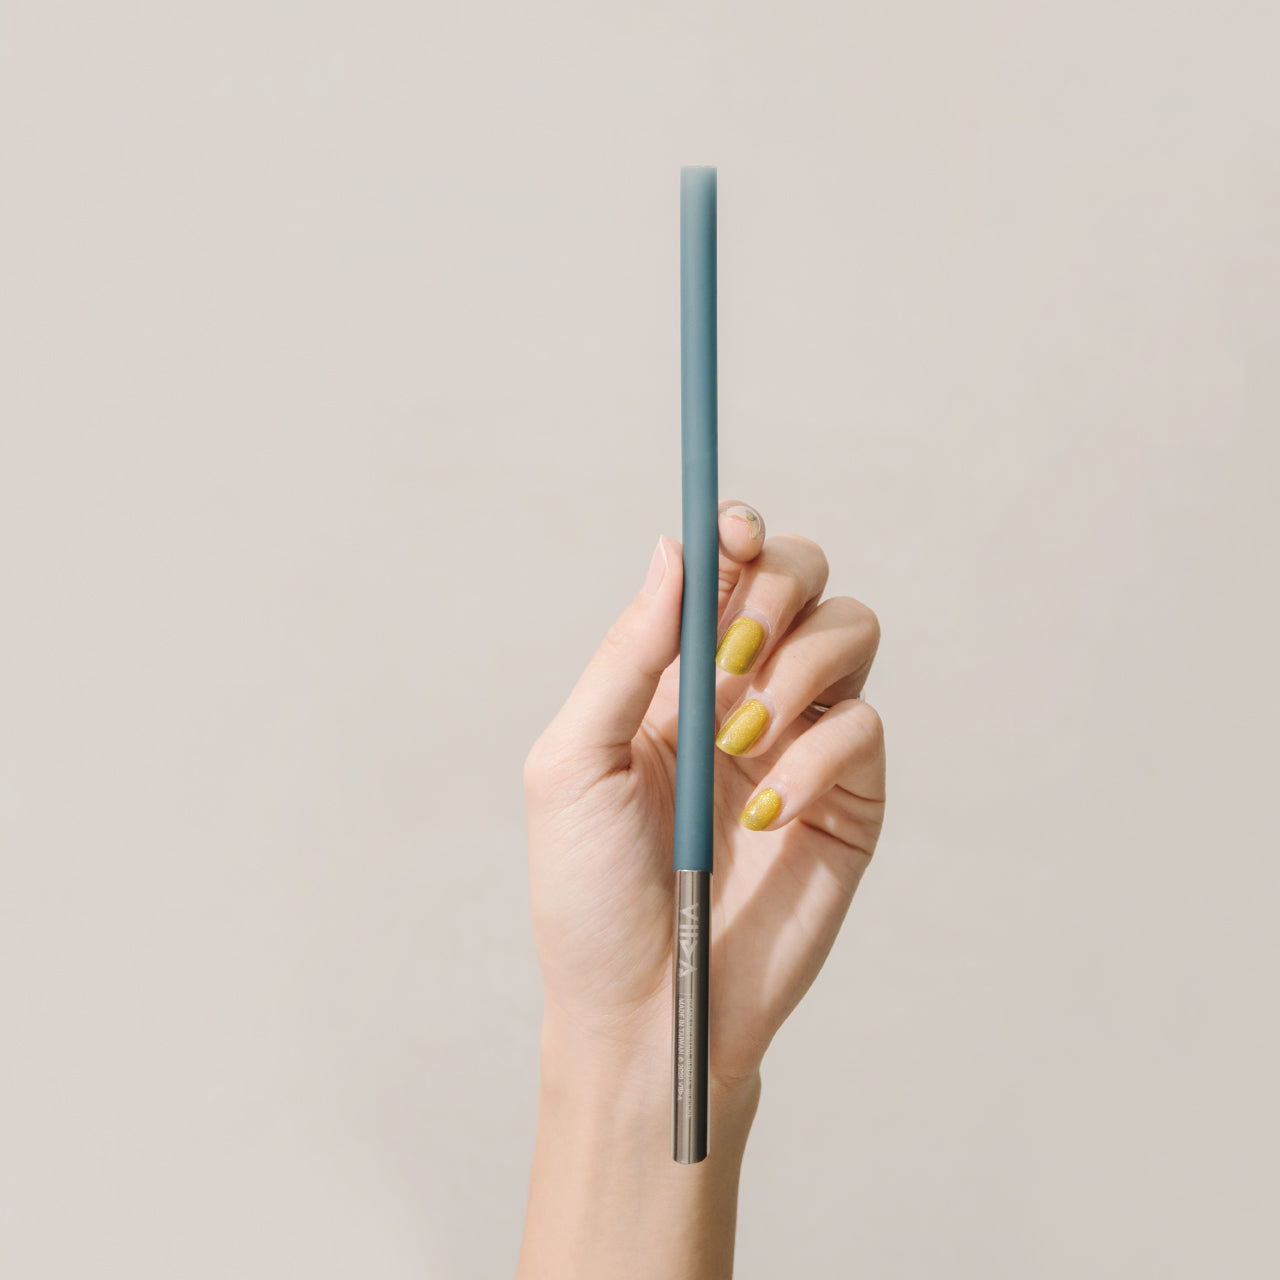 UiU Collapsible Straw